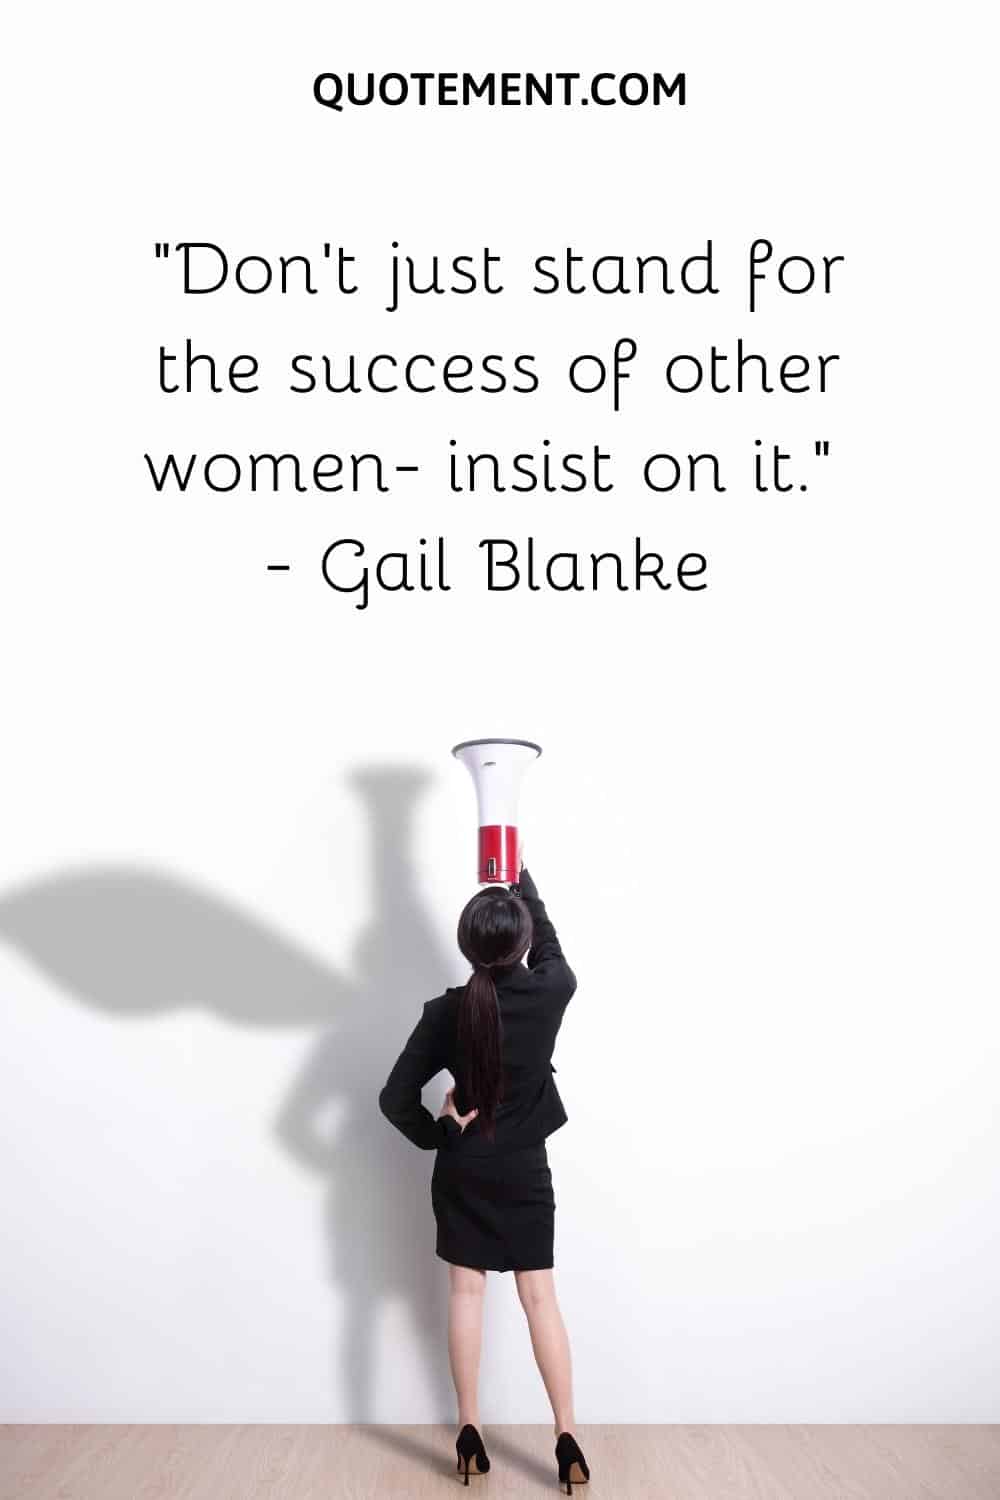 Don’t just stand for the success of other women- insist on it